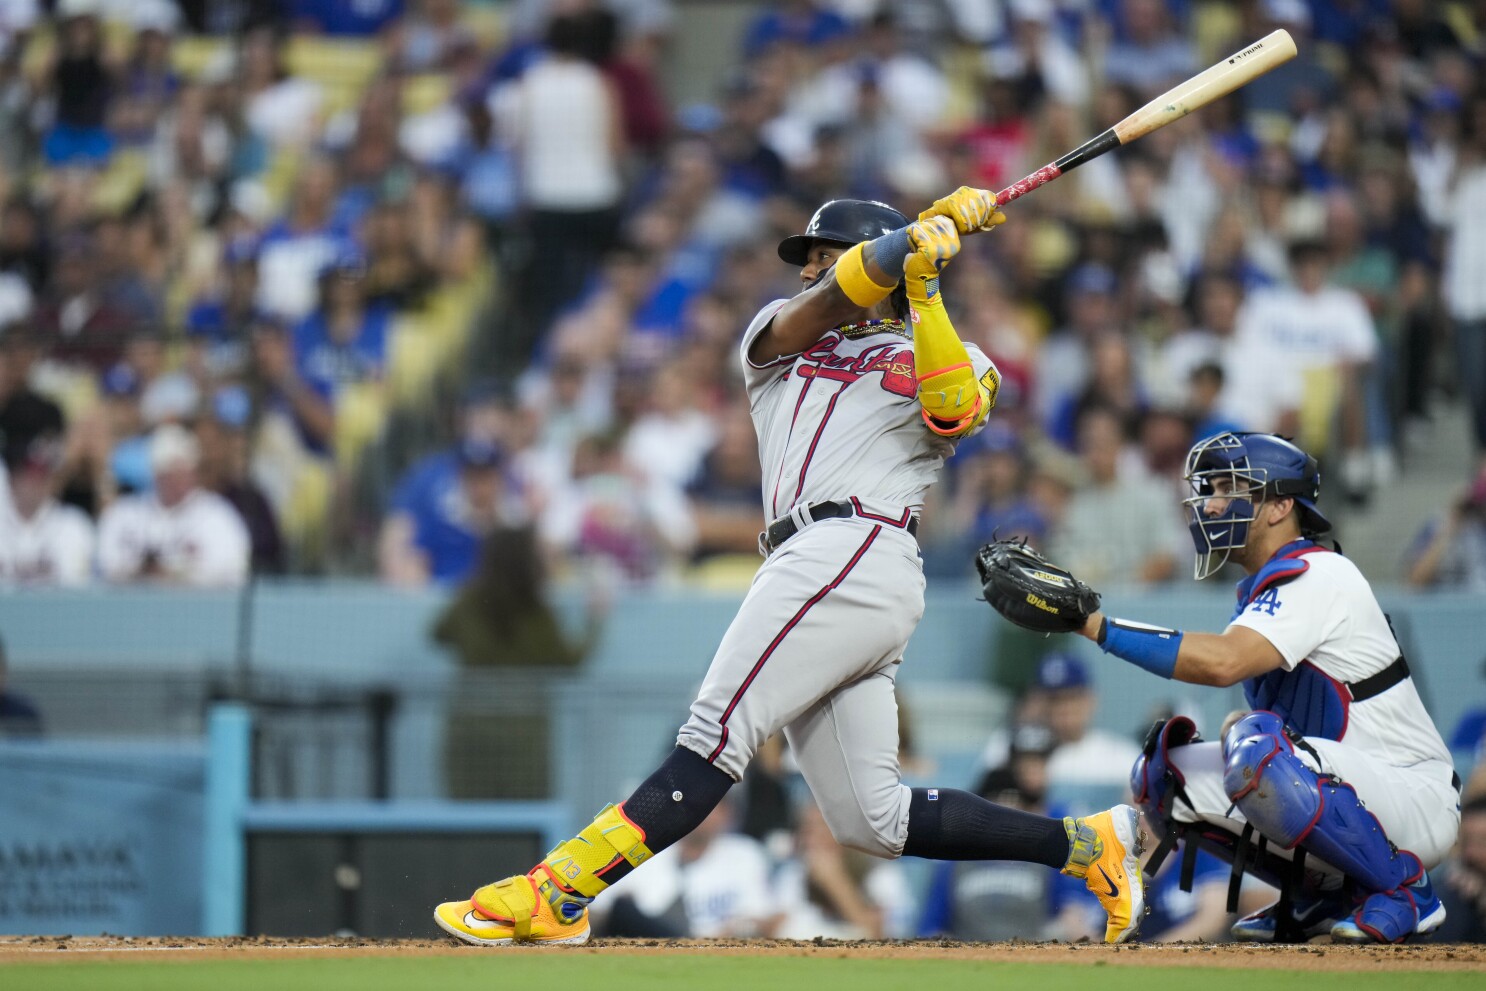 Arcia's ninth-inning double lifts Braves to 8-6 win over Pirates after  Acuña leaves game early - The San Diego Union-Tribune